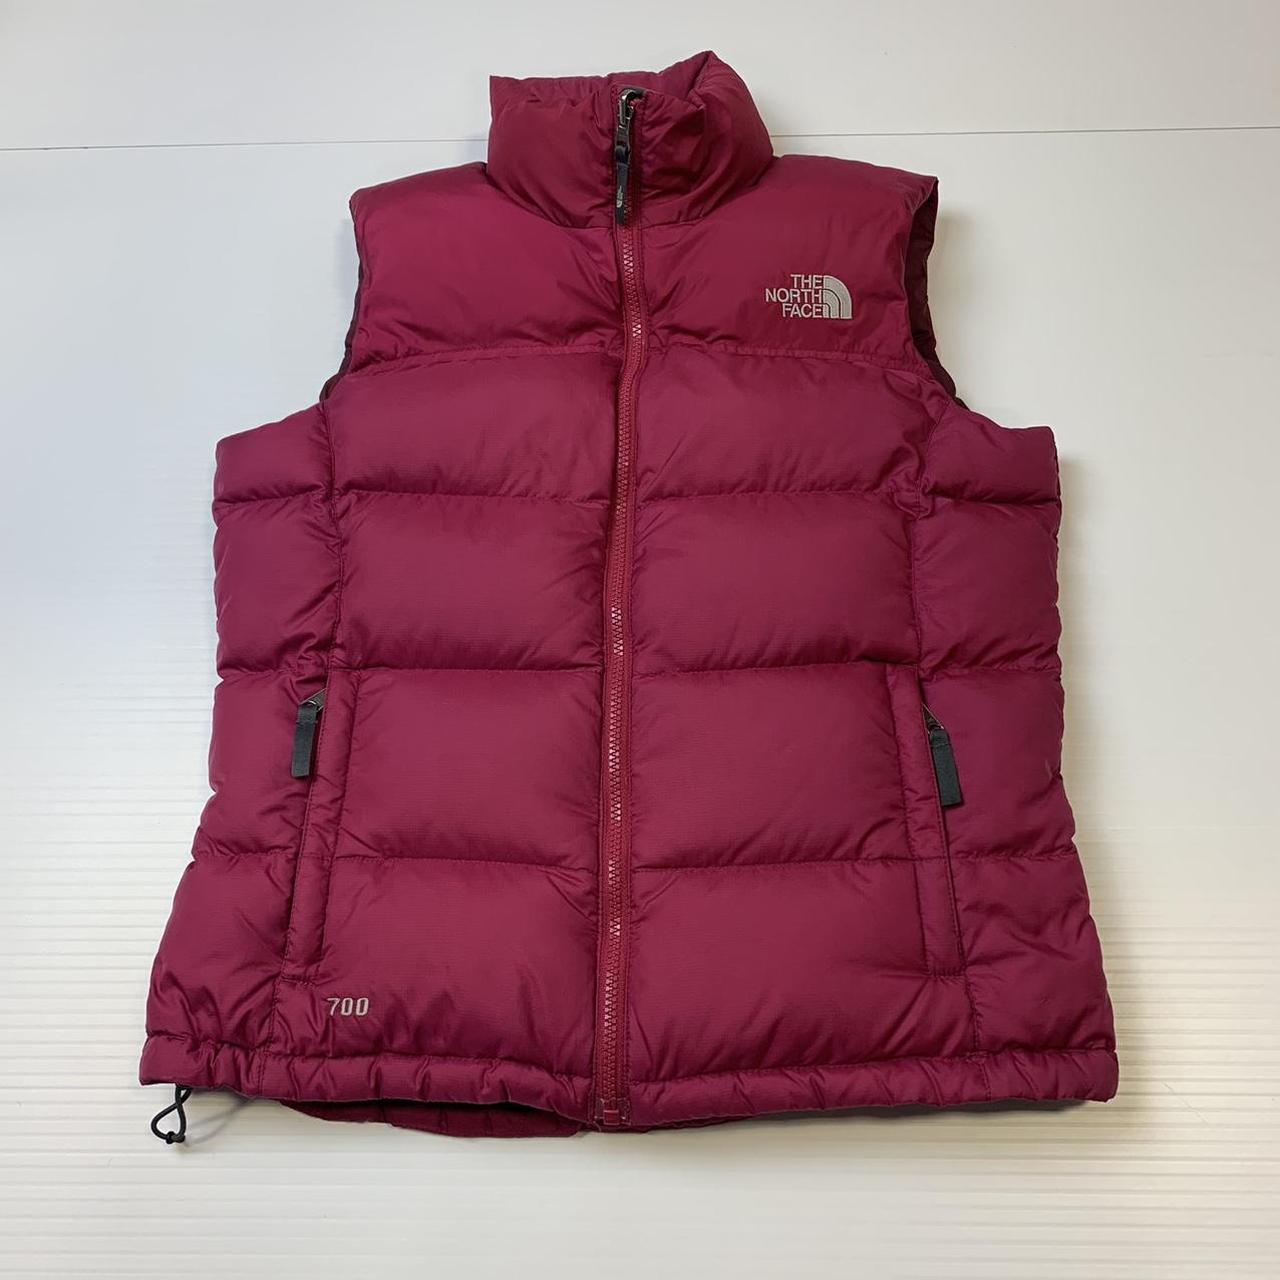 The North Face Nuptse 700 gilet in pink 📌 Our... - Depop